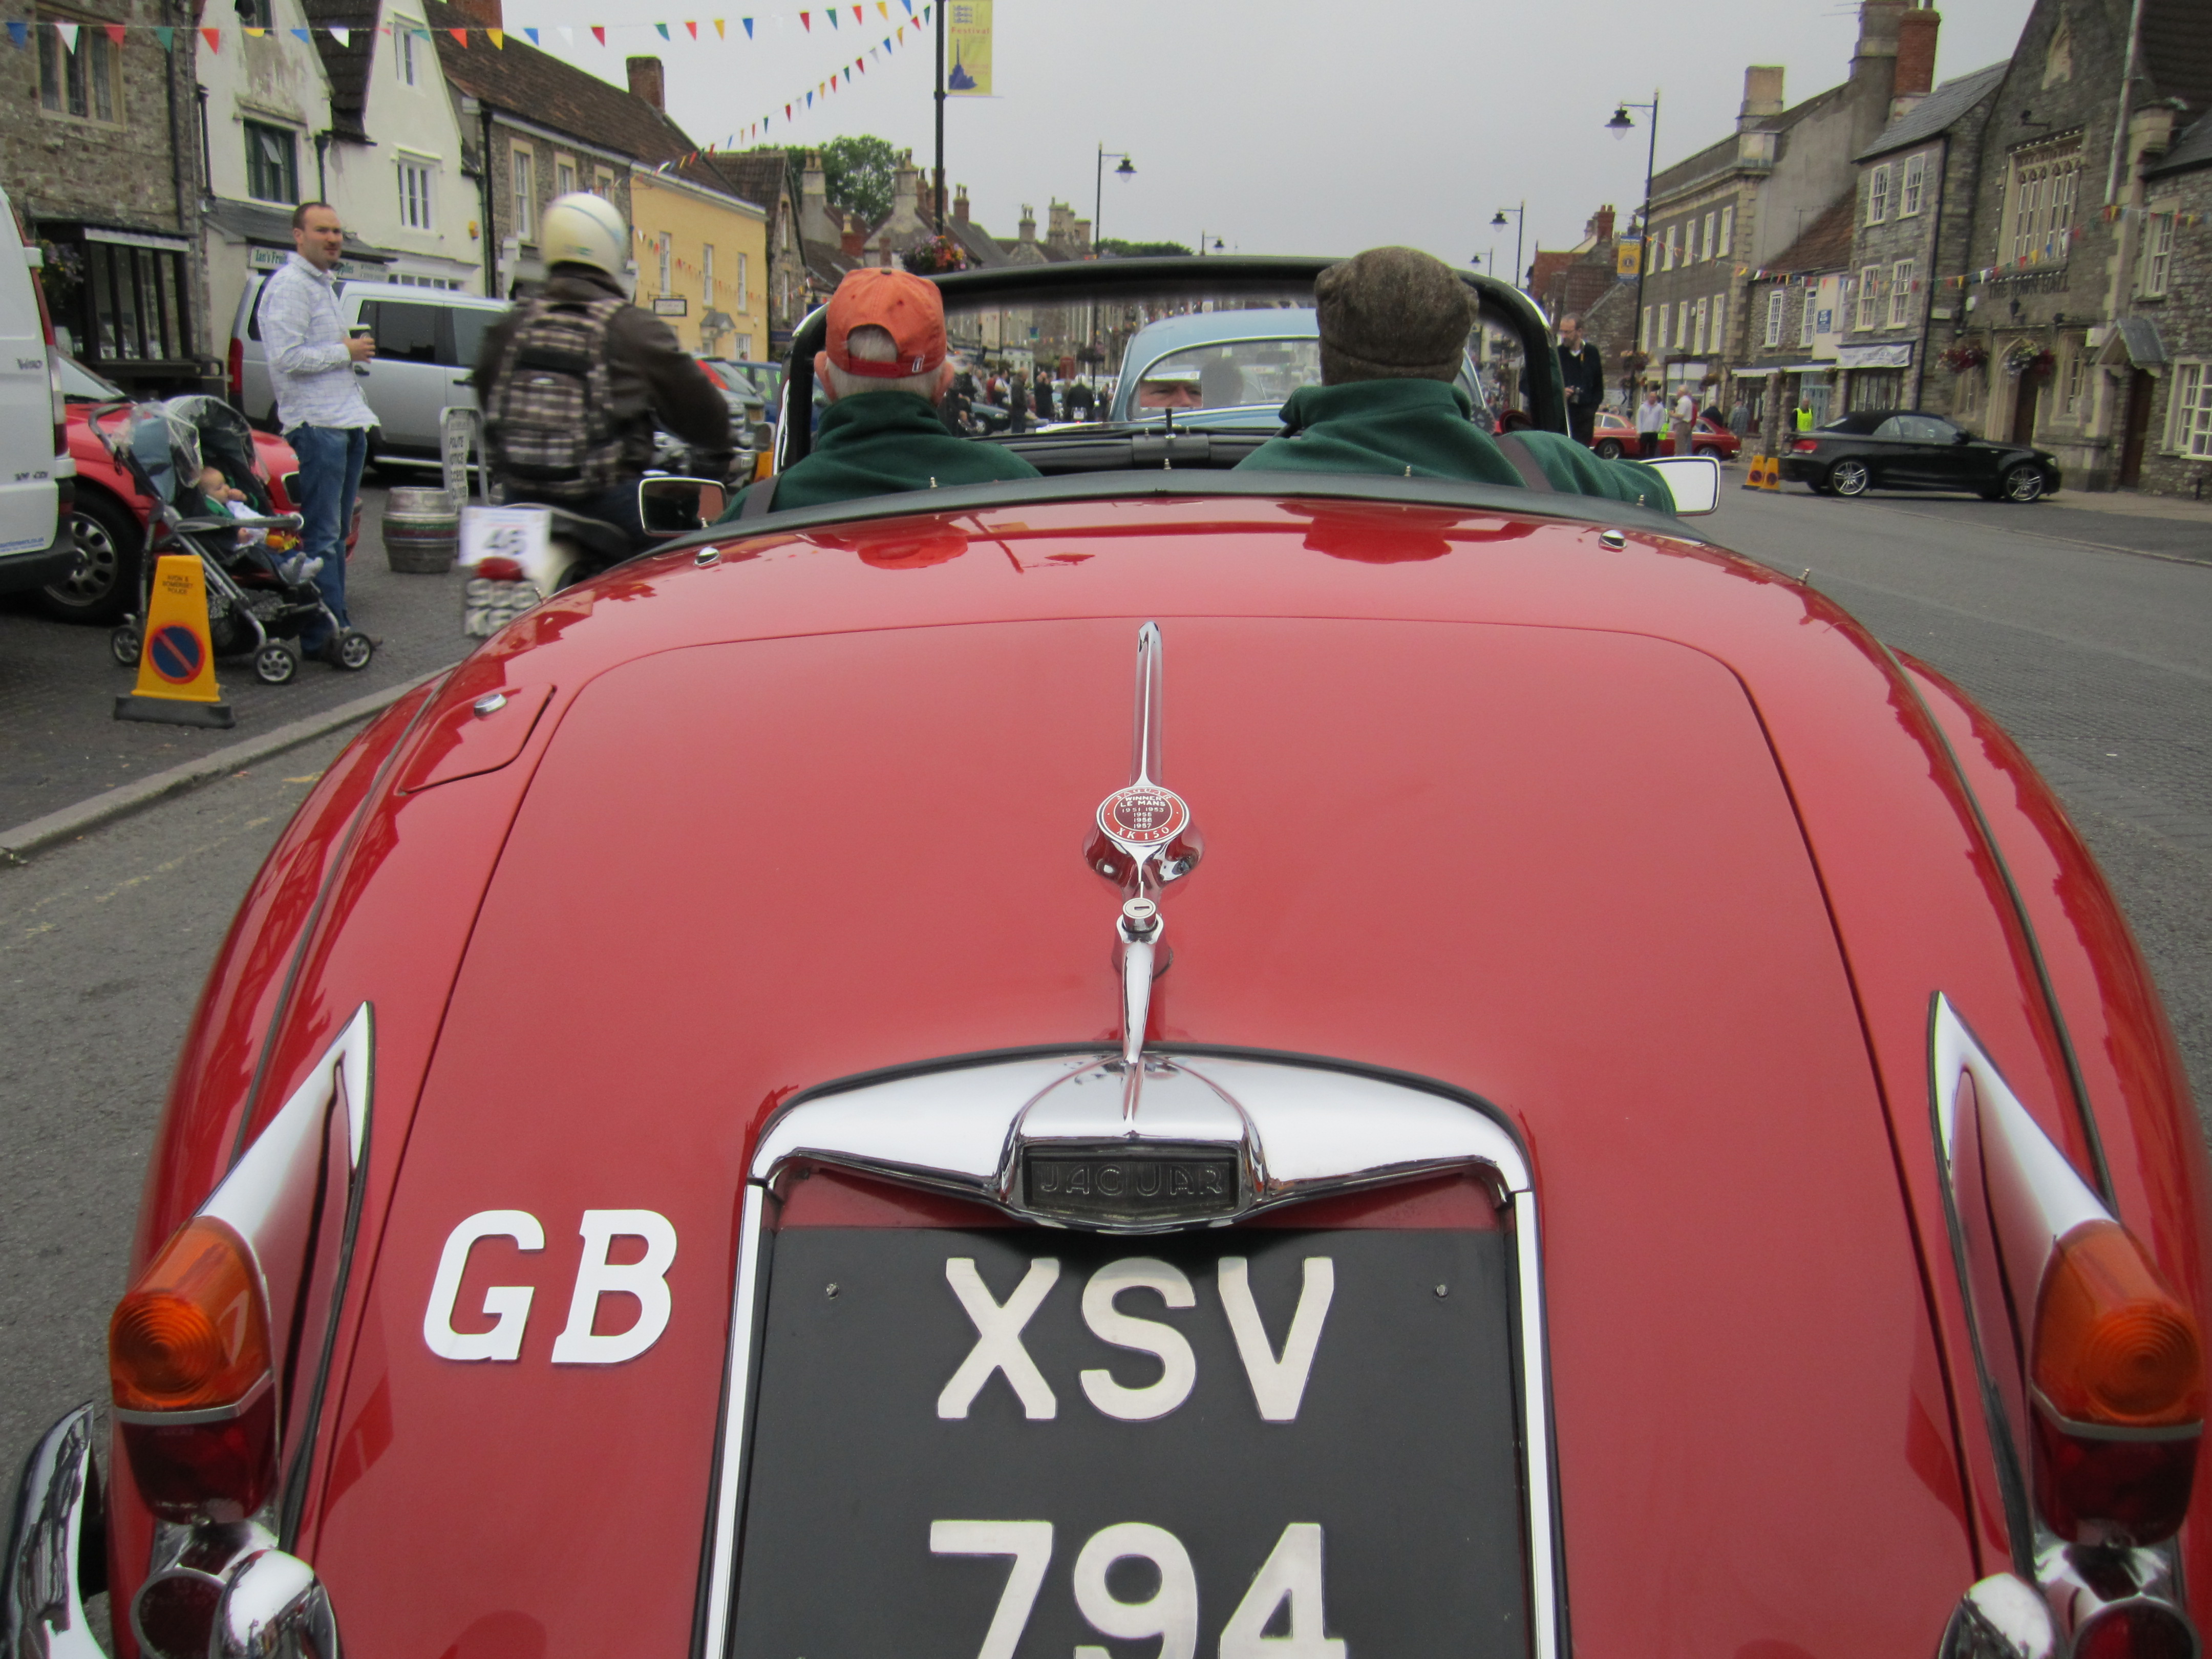 2014 Chipping Sodbury Classic Run Entry Details